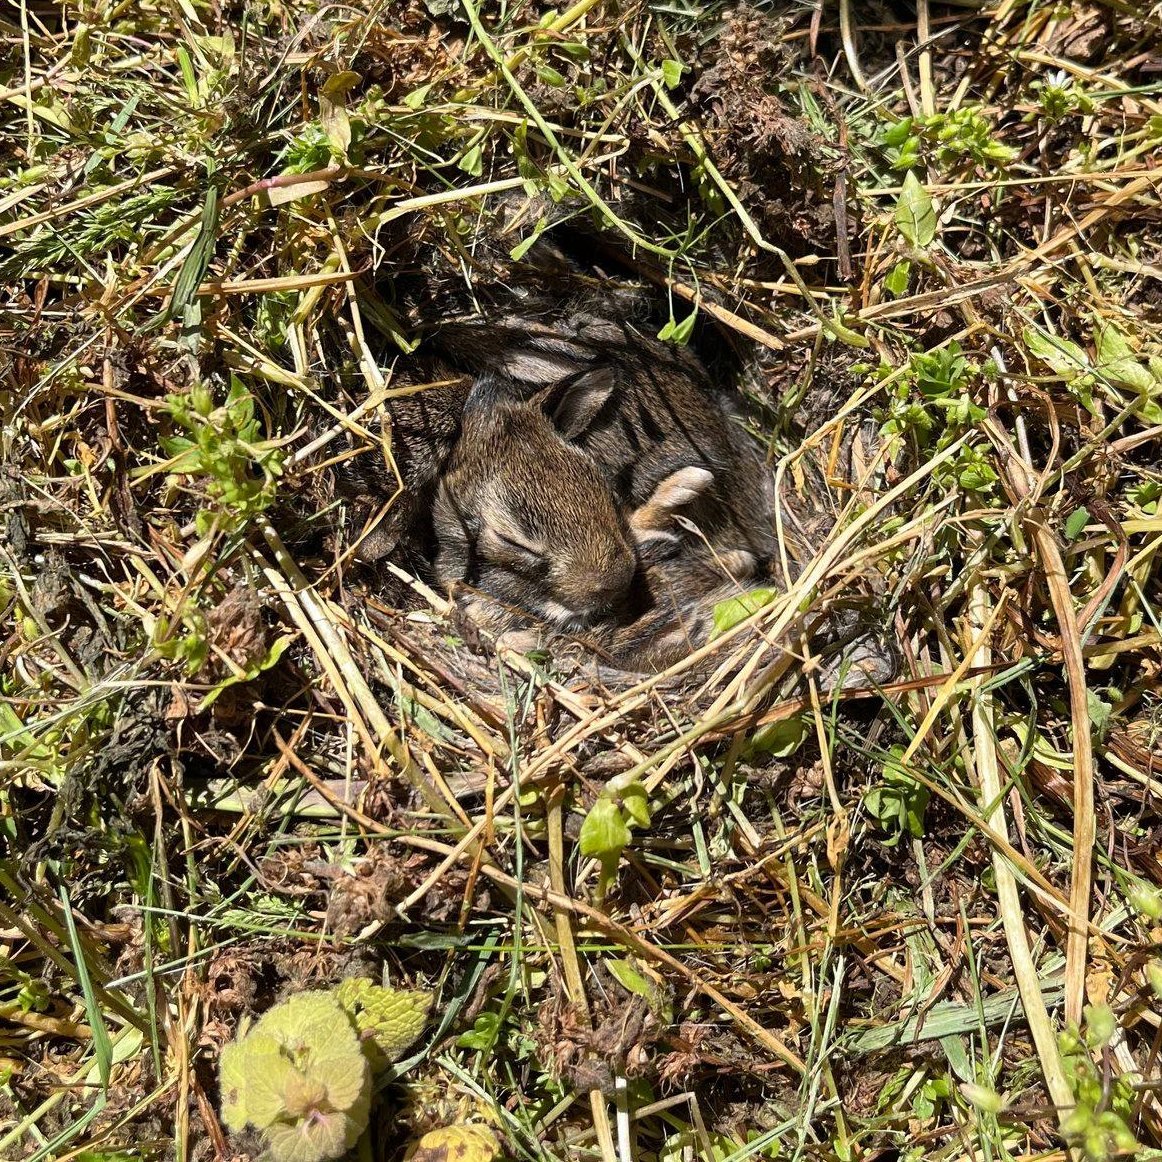 Taking in nature's special moments! 

BHS second-grade students discovered a rabbit nest in the garden during their program this past week. To help keep the nest safe they placed a marker to let others know to be mindful.